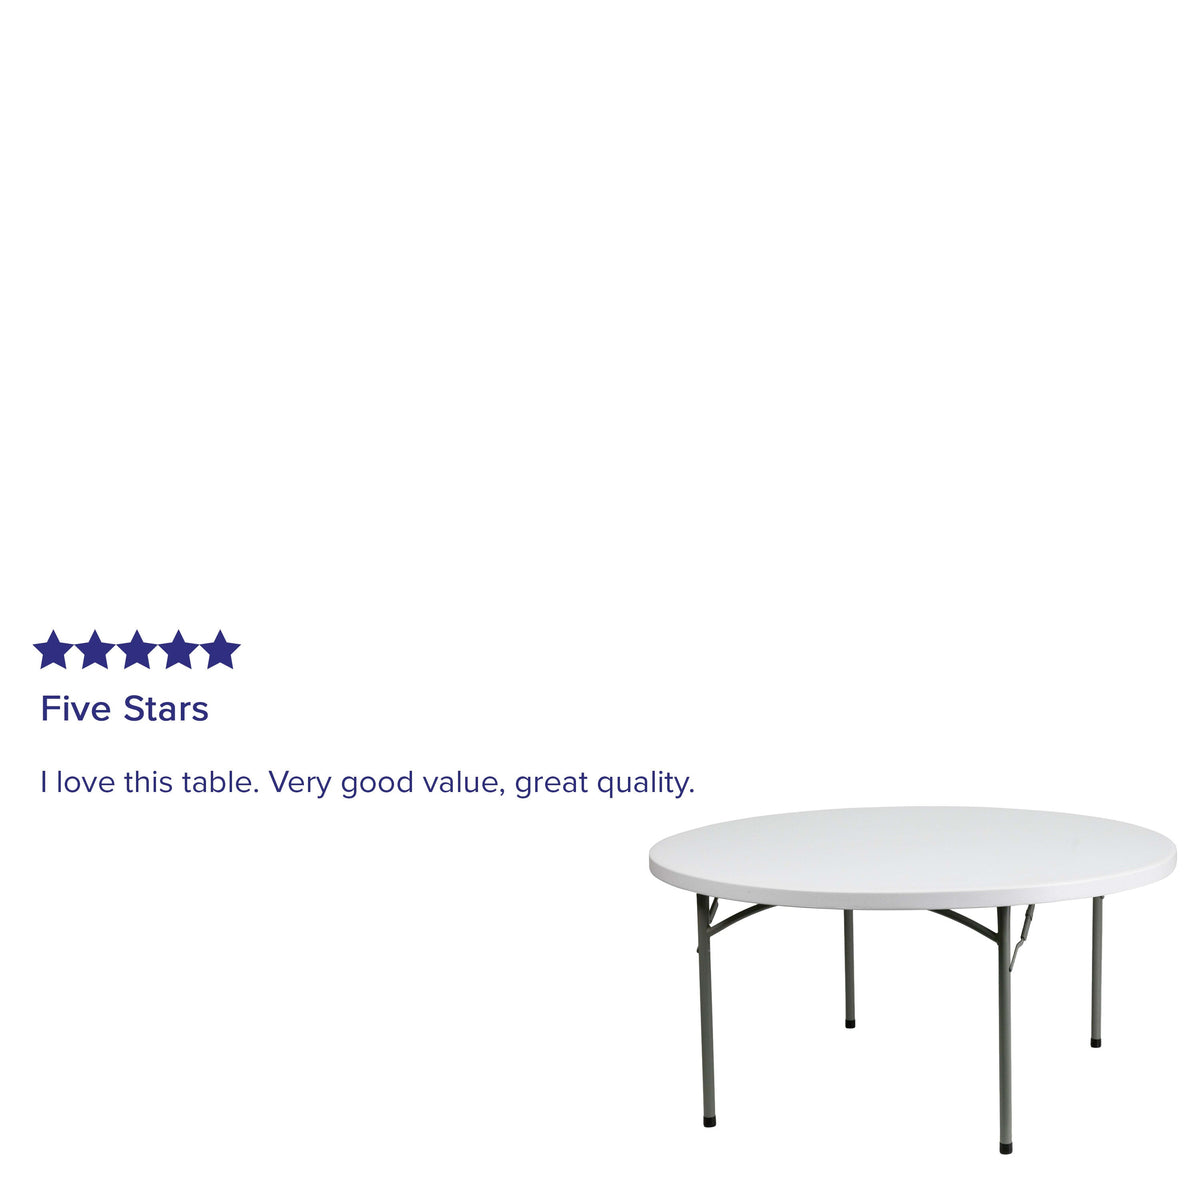 5-Foot Round Plastic Folding Event Table w/ 2inch Thick White Surface